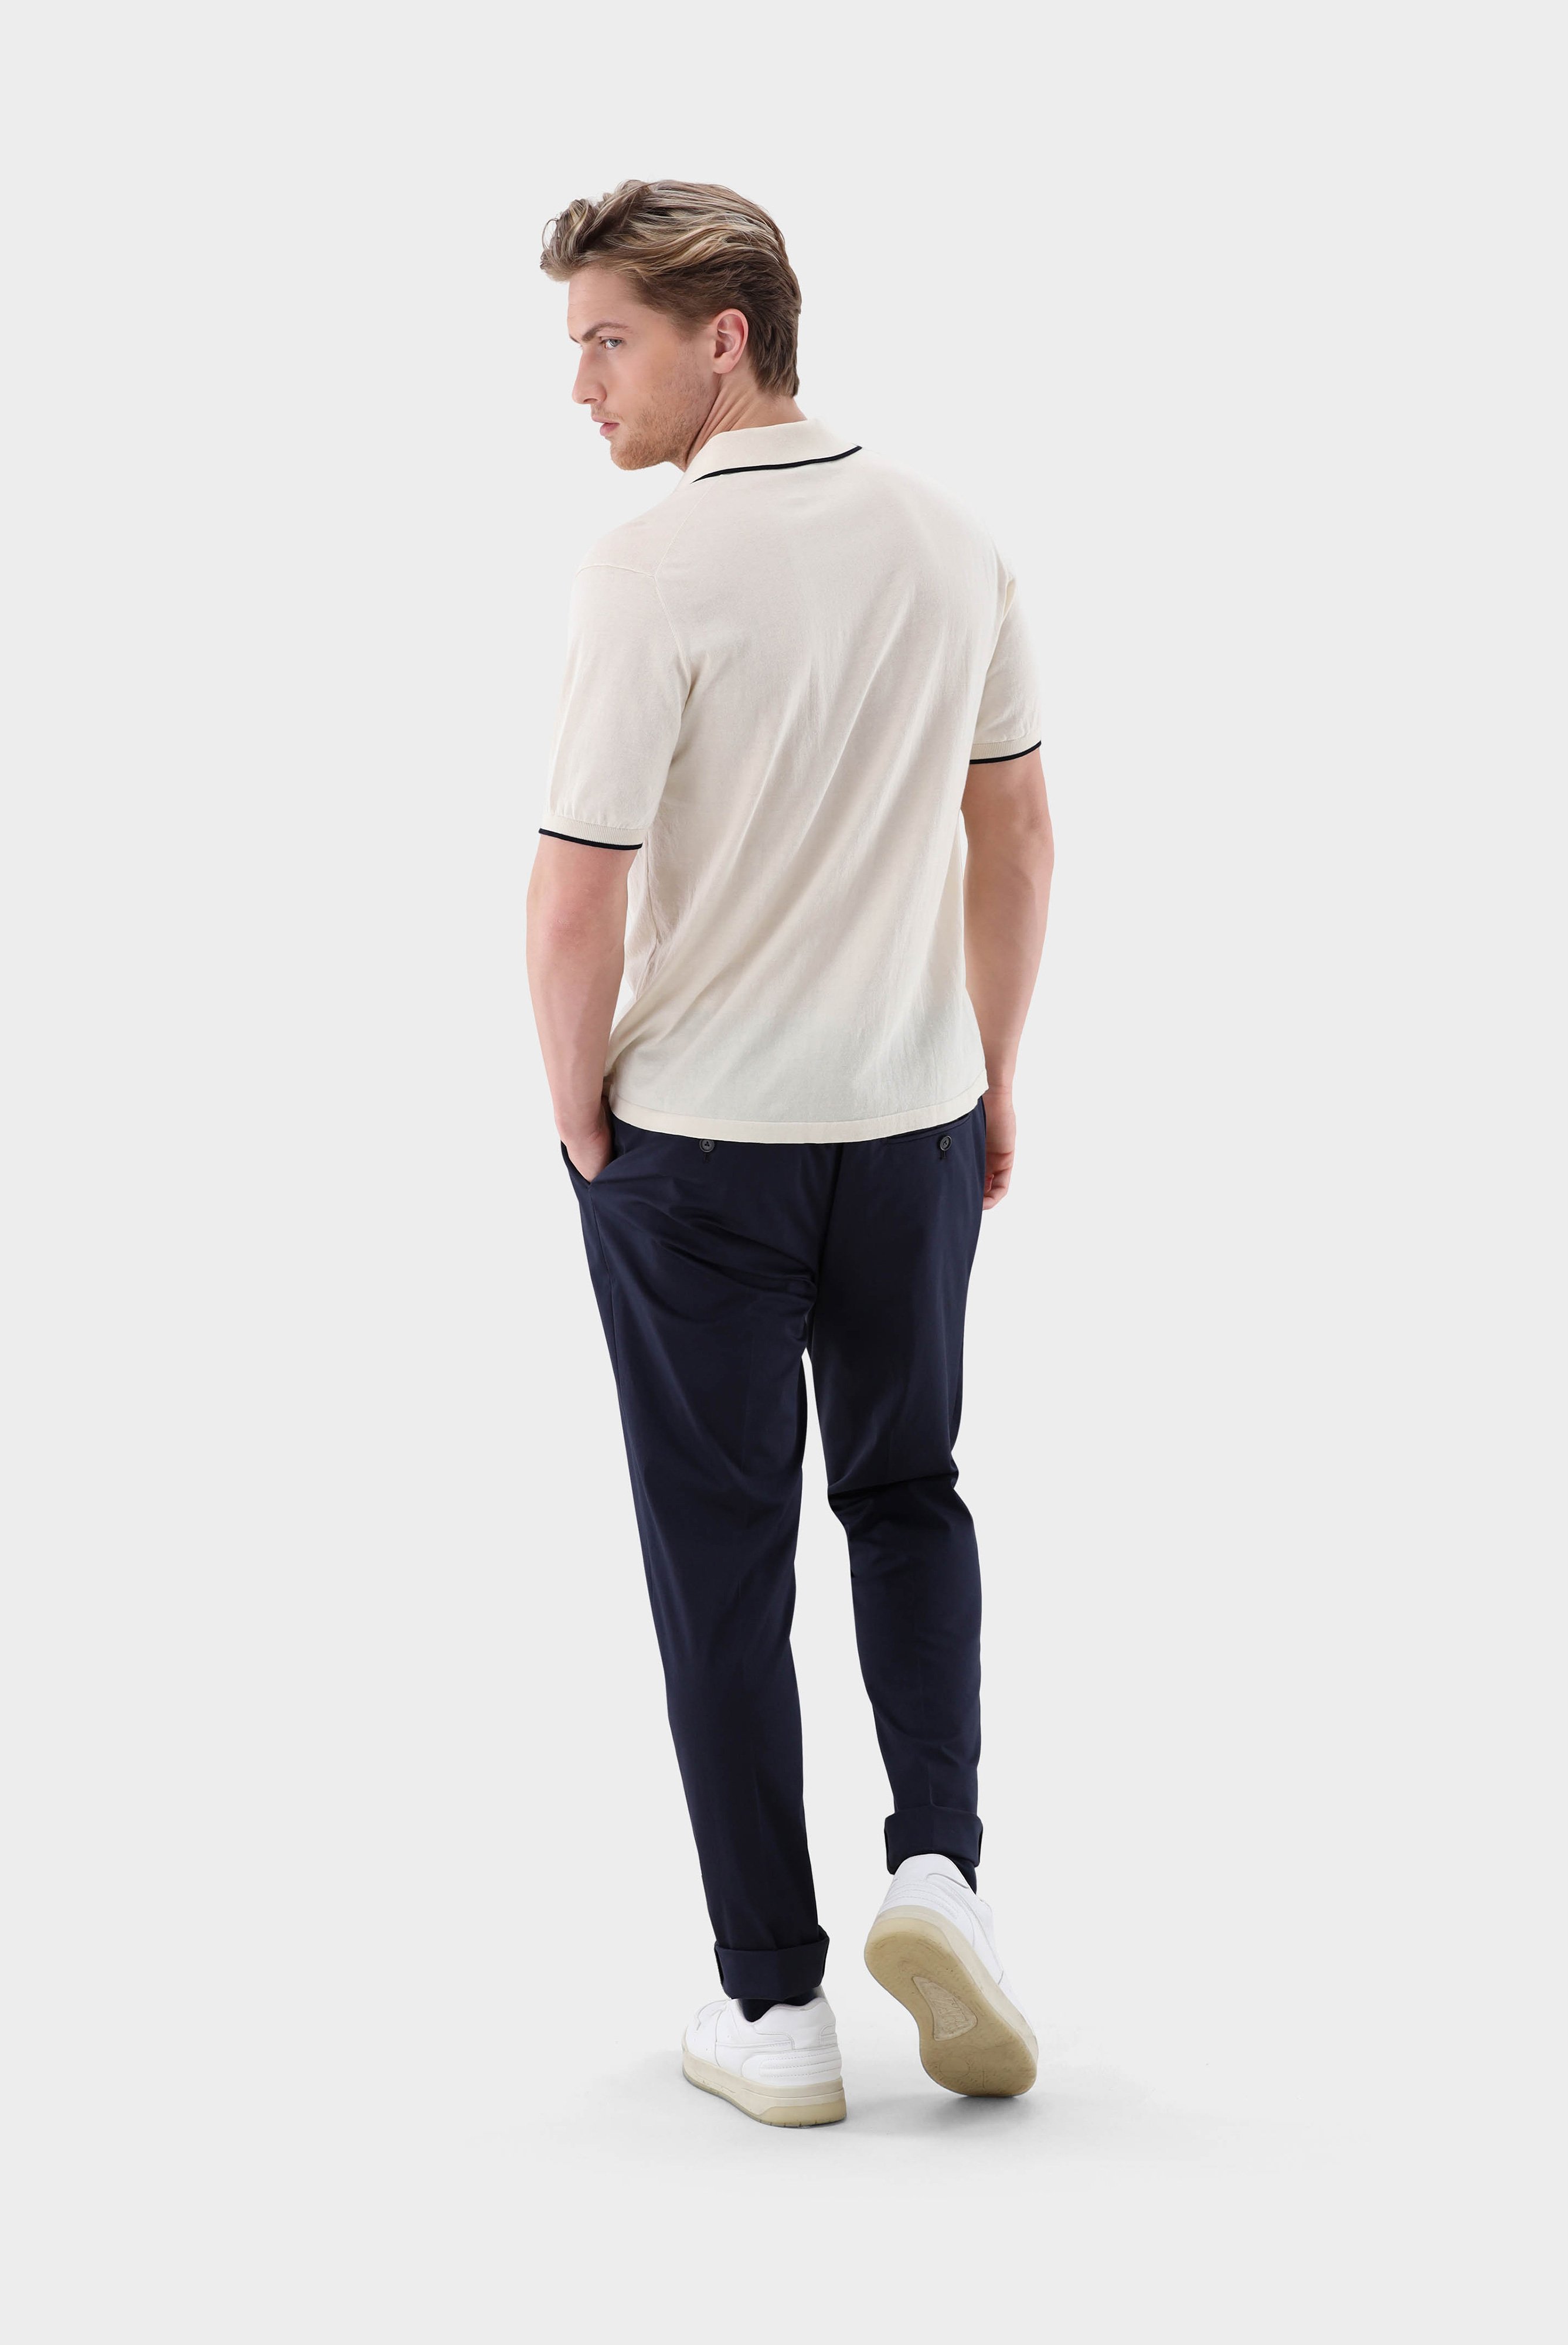 Poloshirts+Zip Knit-Polo in Air Cotton+82.8647.S7.S00174.120.S